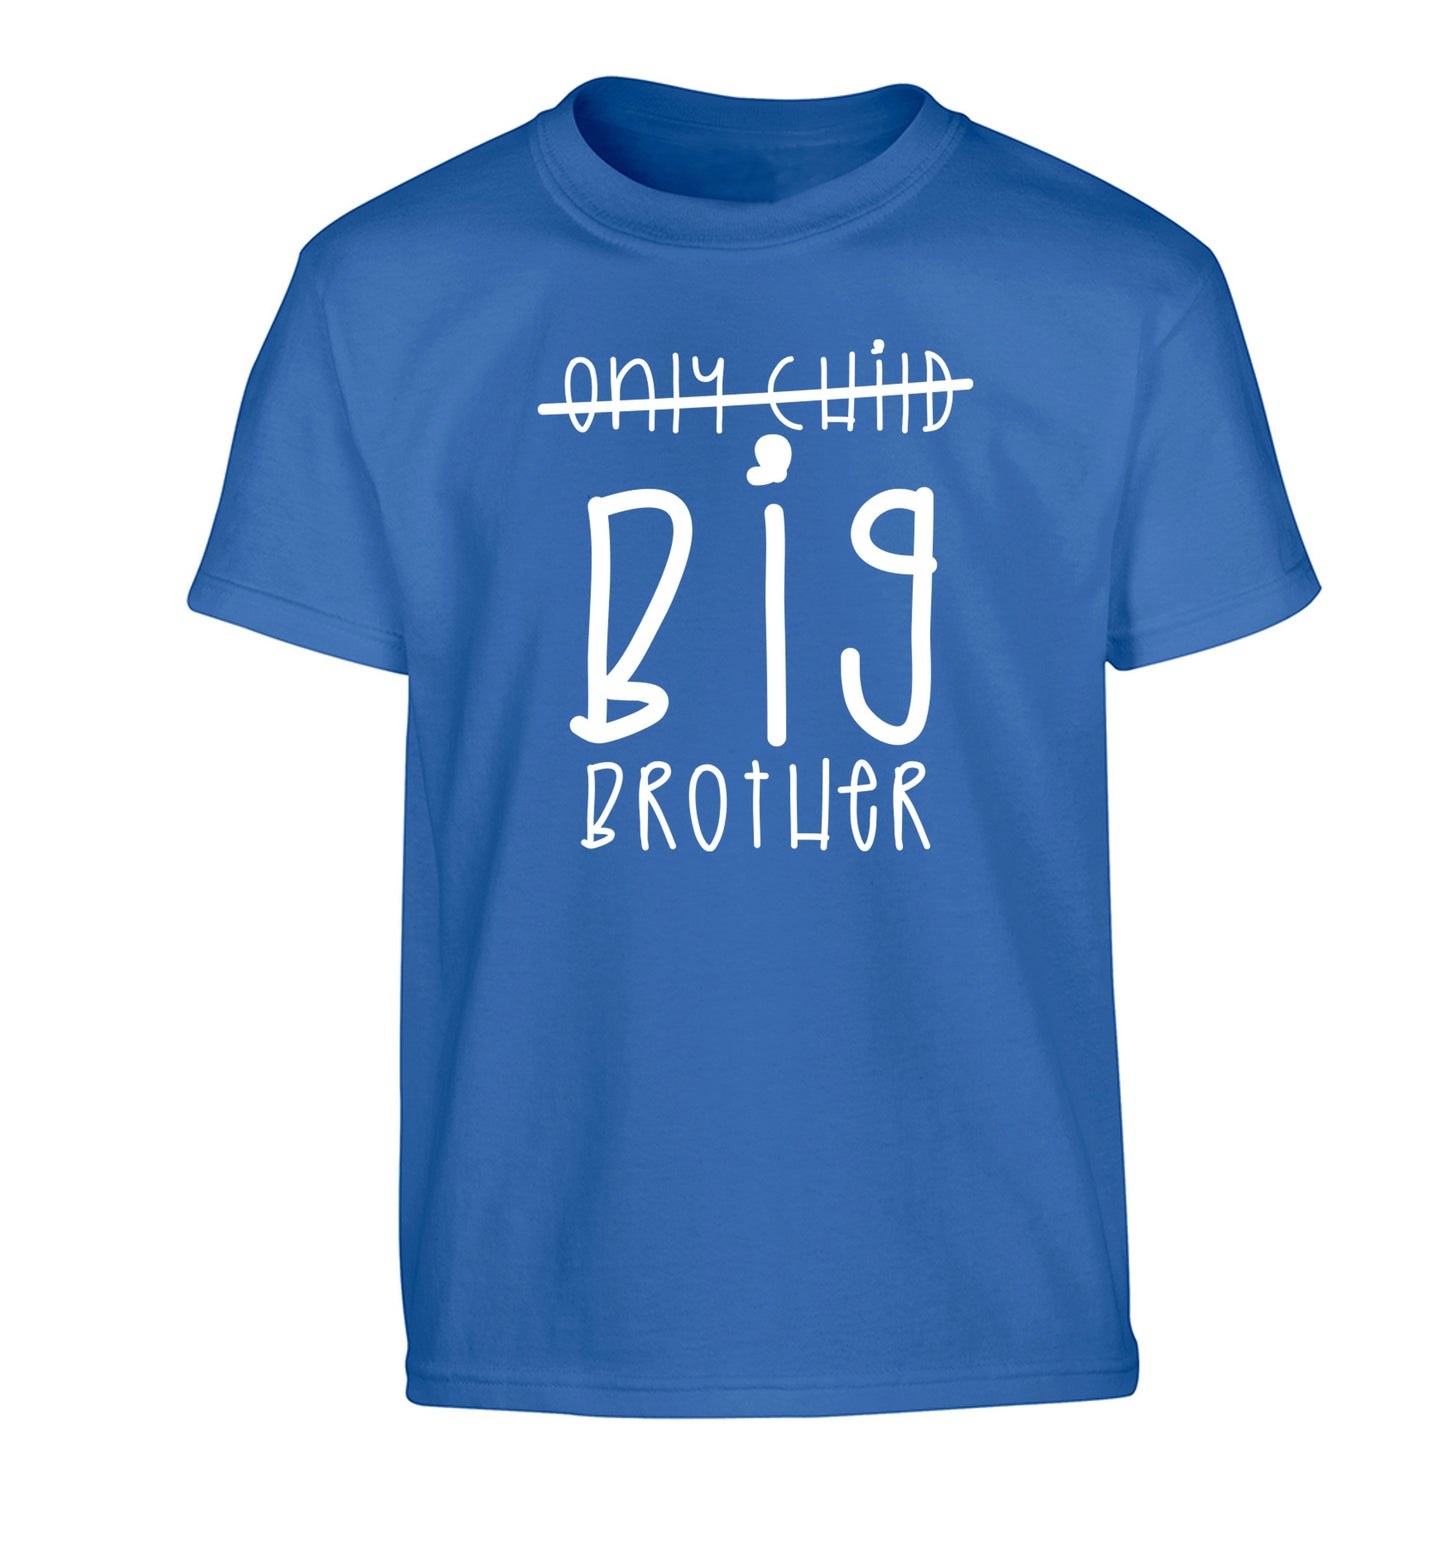 Only child big brother Children's blue Tshirt 12-14 Years